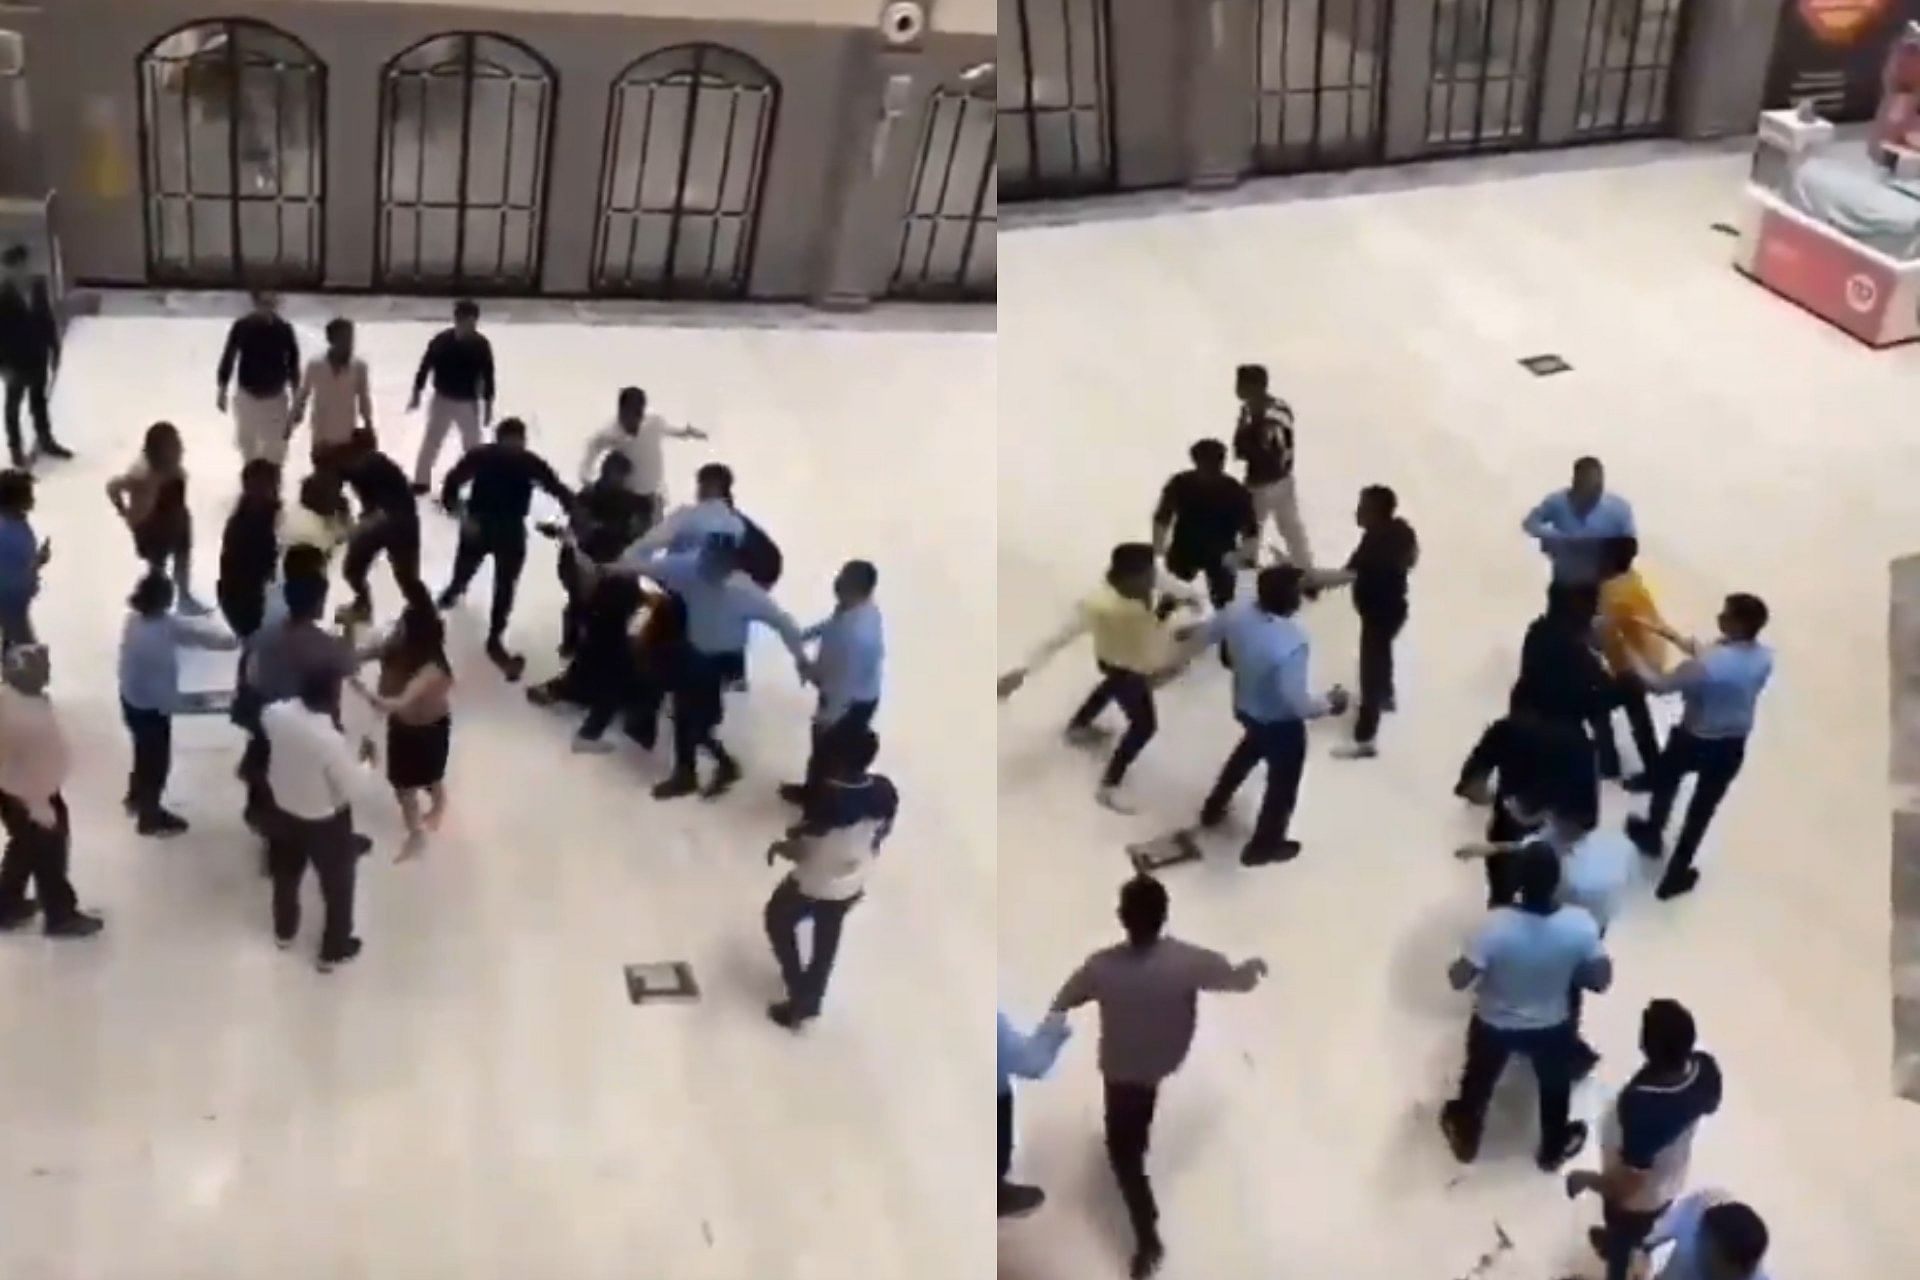 Fight in a garden galleria of noida mall in noida is going video viral on social media